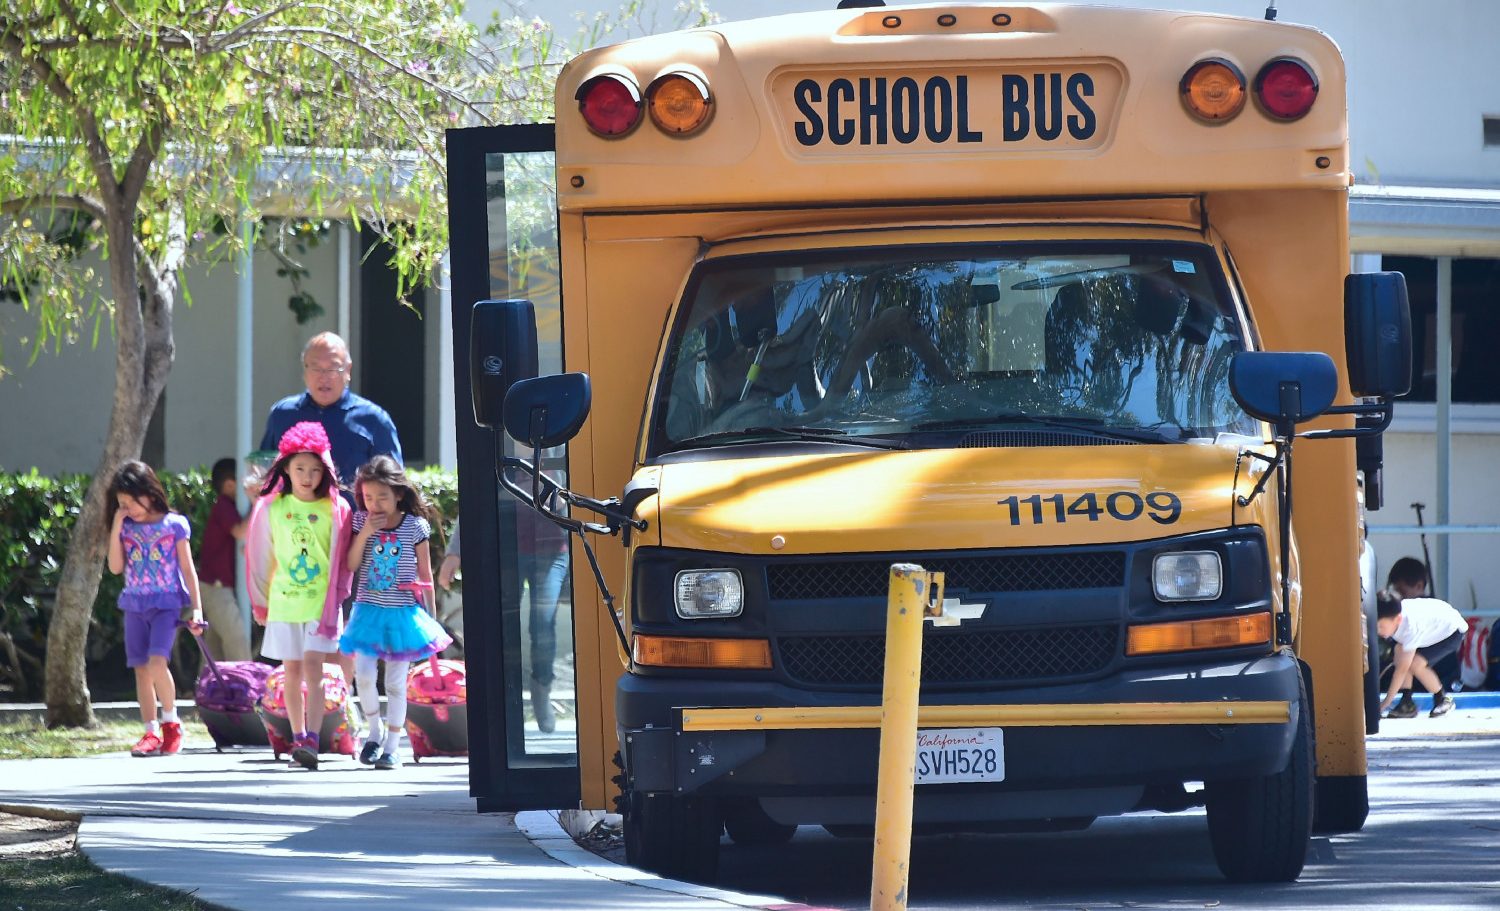 School Girl Dragged More Than 300 Feet After Backpack Got Stuck on School Bus